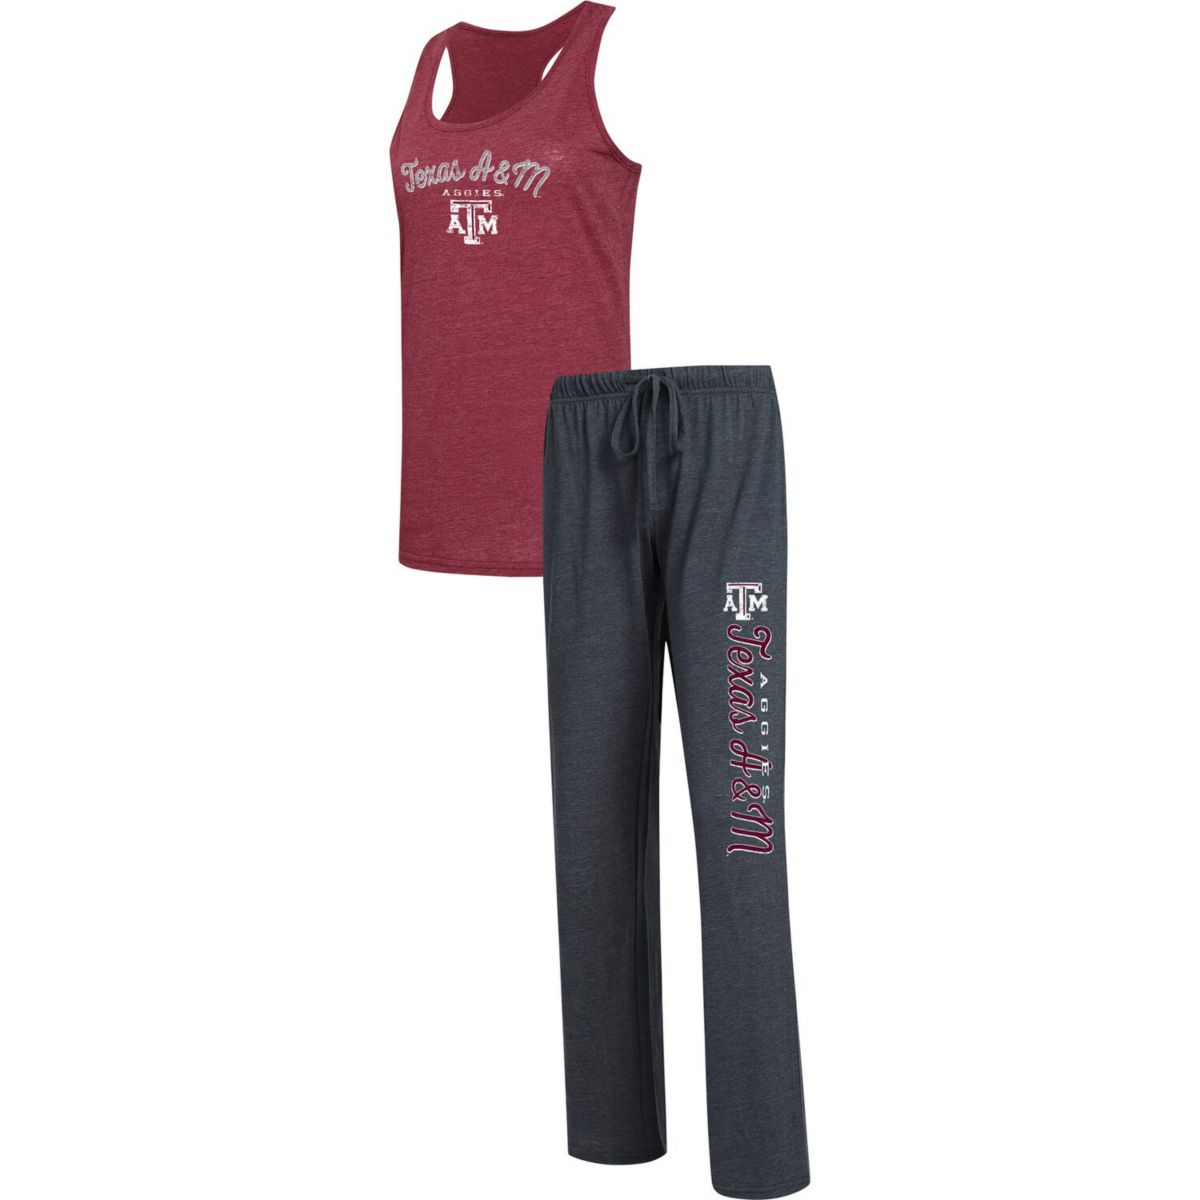 Women's Texas A&M Aggies Concepts Sport Heathered Maroon/Charcoal Plus Size Essentials Topic Tank Top & Pants Sleep Set Unbranded